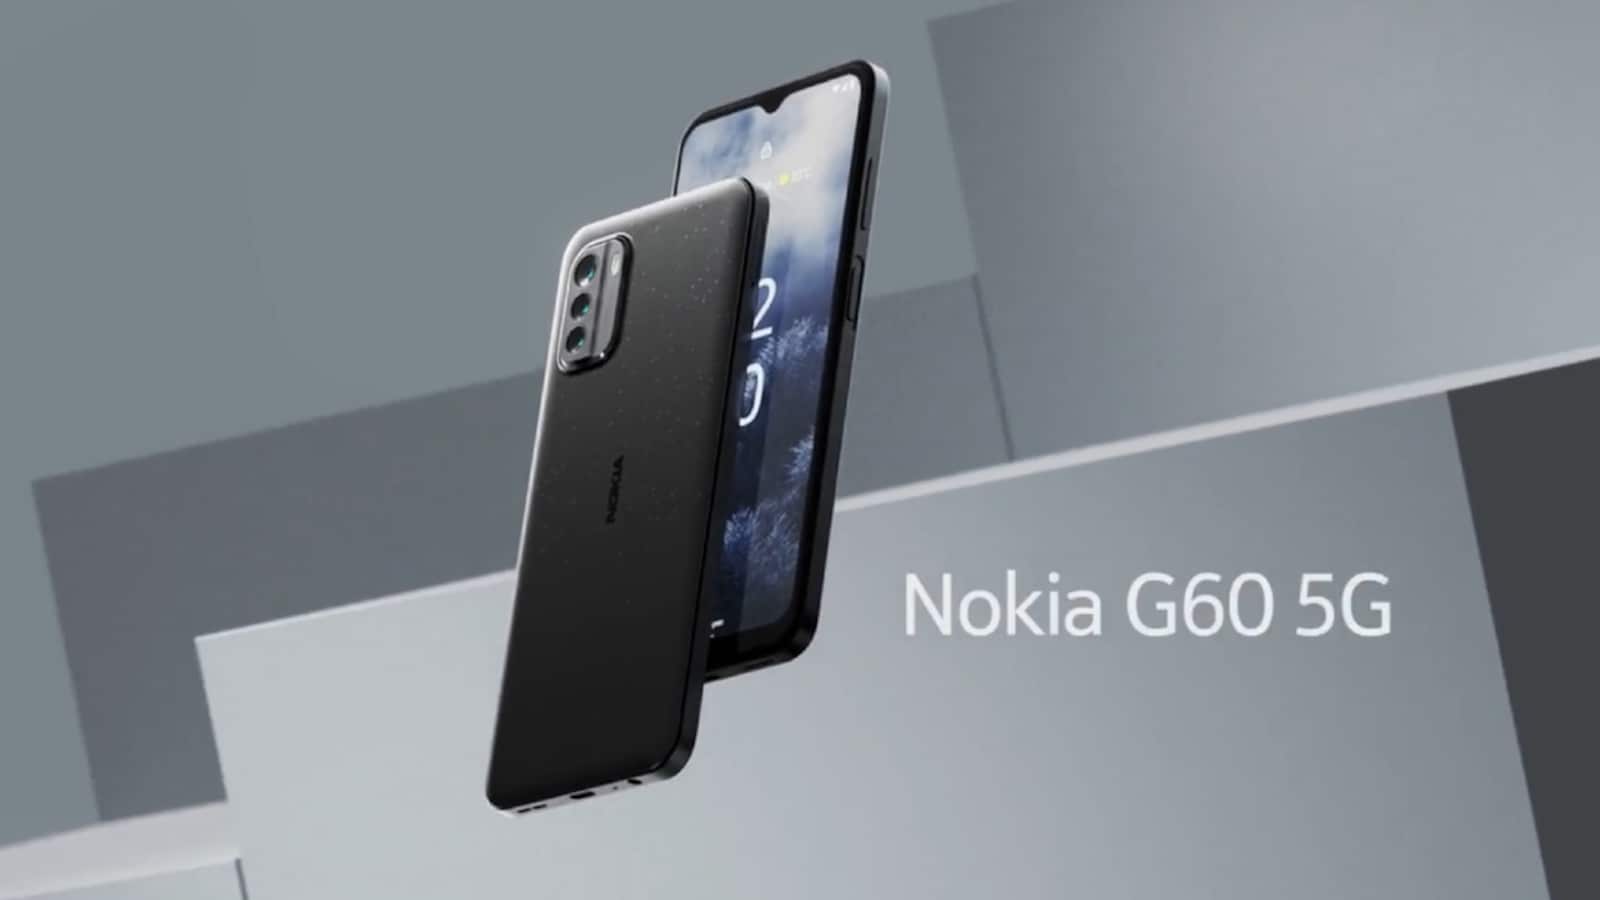 Nokia G60 5G India launch confirmed: All you need to know